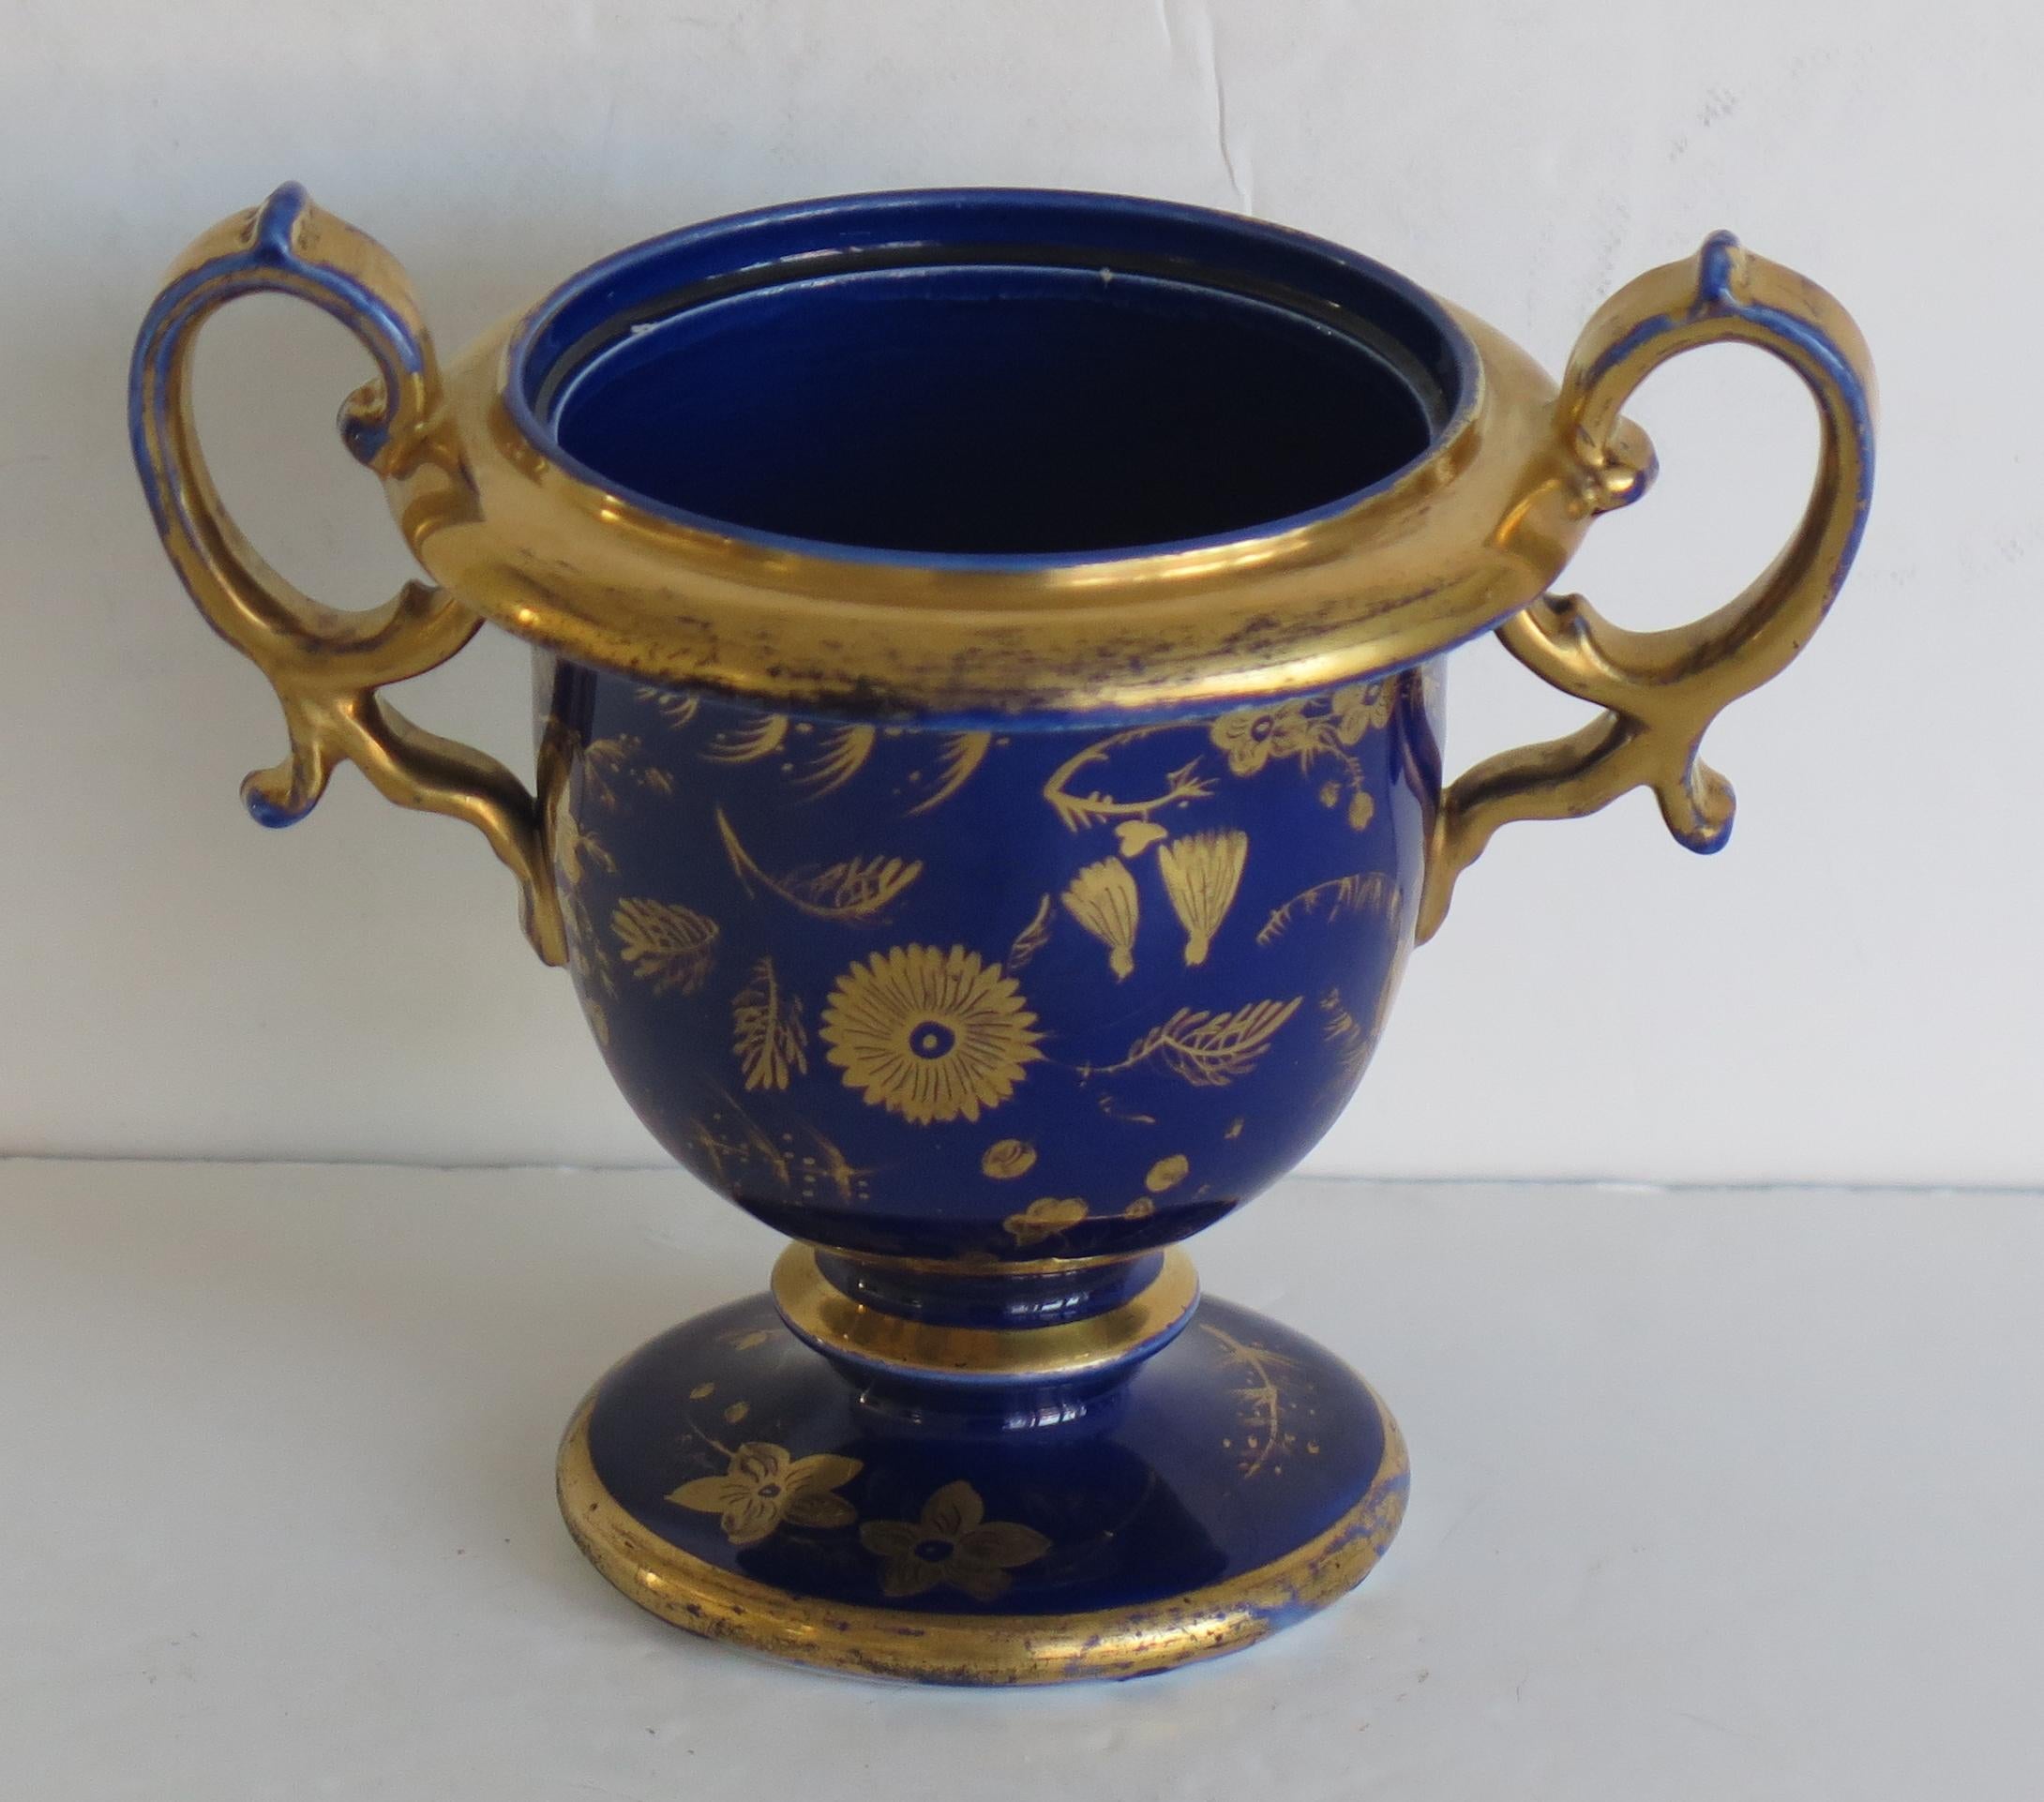 This is a rare ironstone vase with high loop handles, made by the Mason's factory, England in the early 19th century.

This footed vase is potted in a rare shape with two side handles, giving a very decorative profile.

 The vase is decorated in